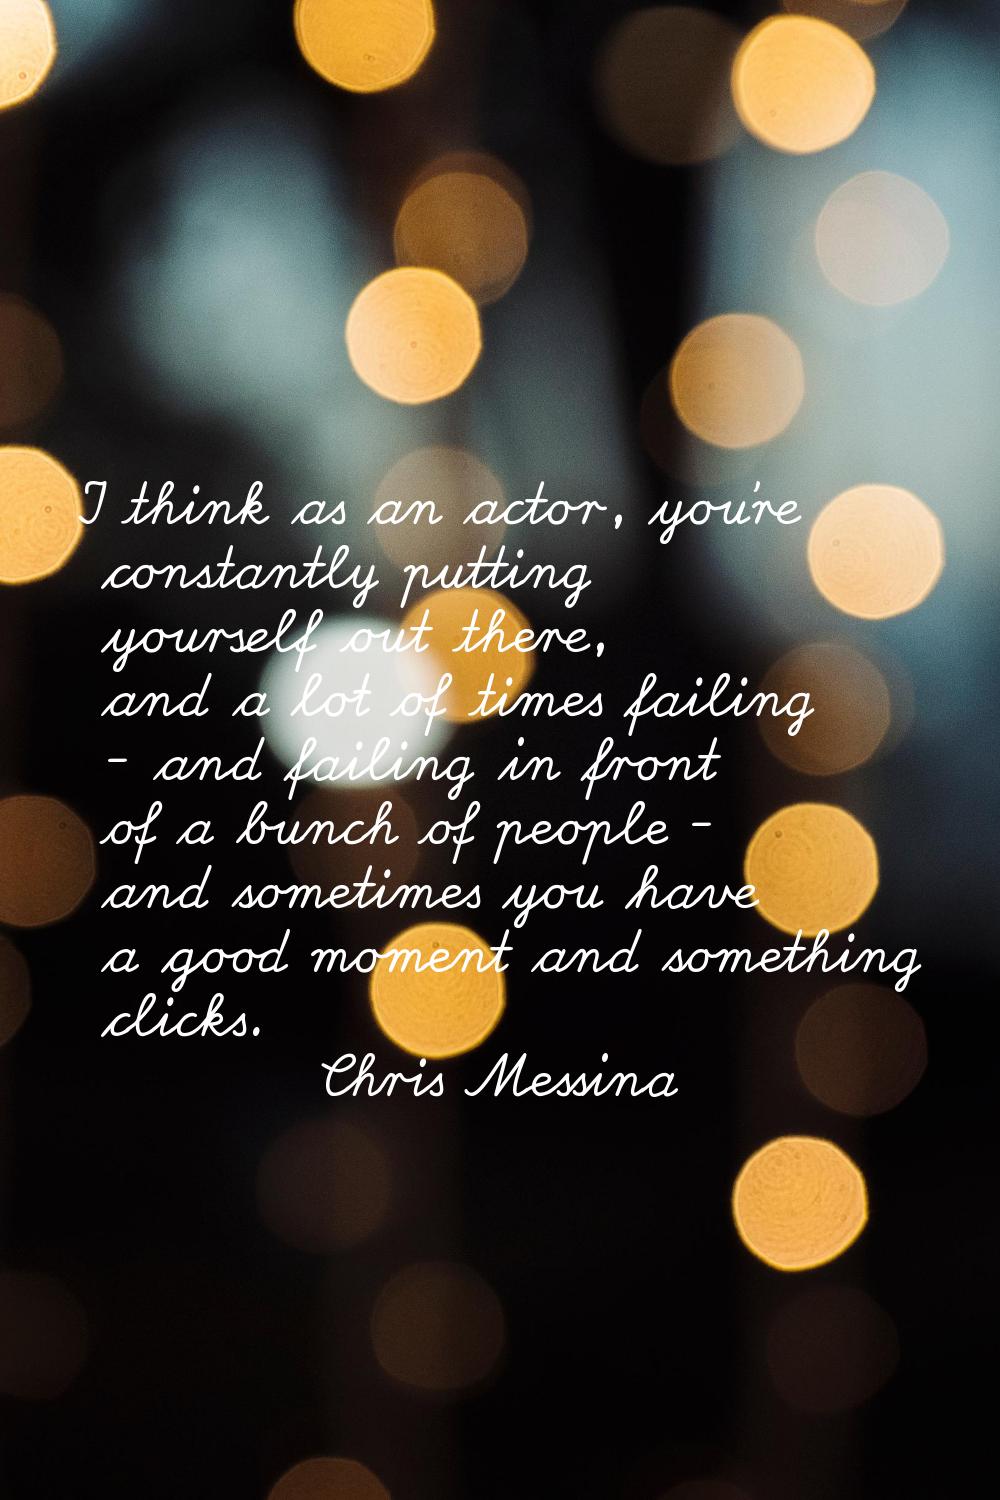 I think as an actor, you're constantly putting yourself out there, and a lot of times failing - and